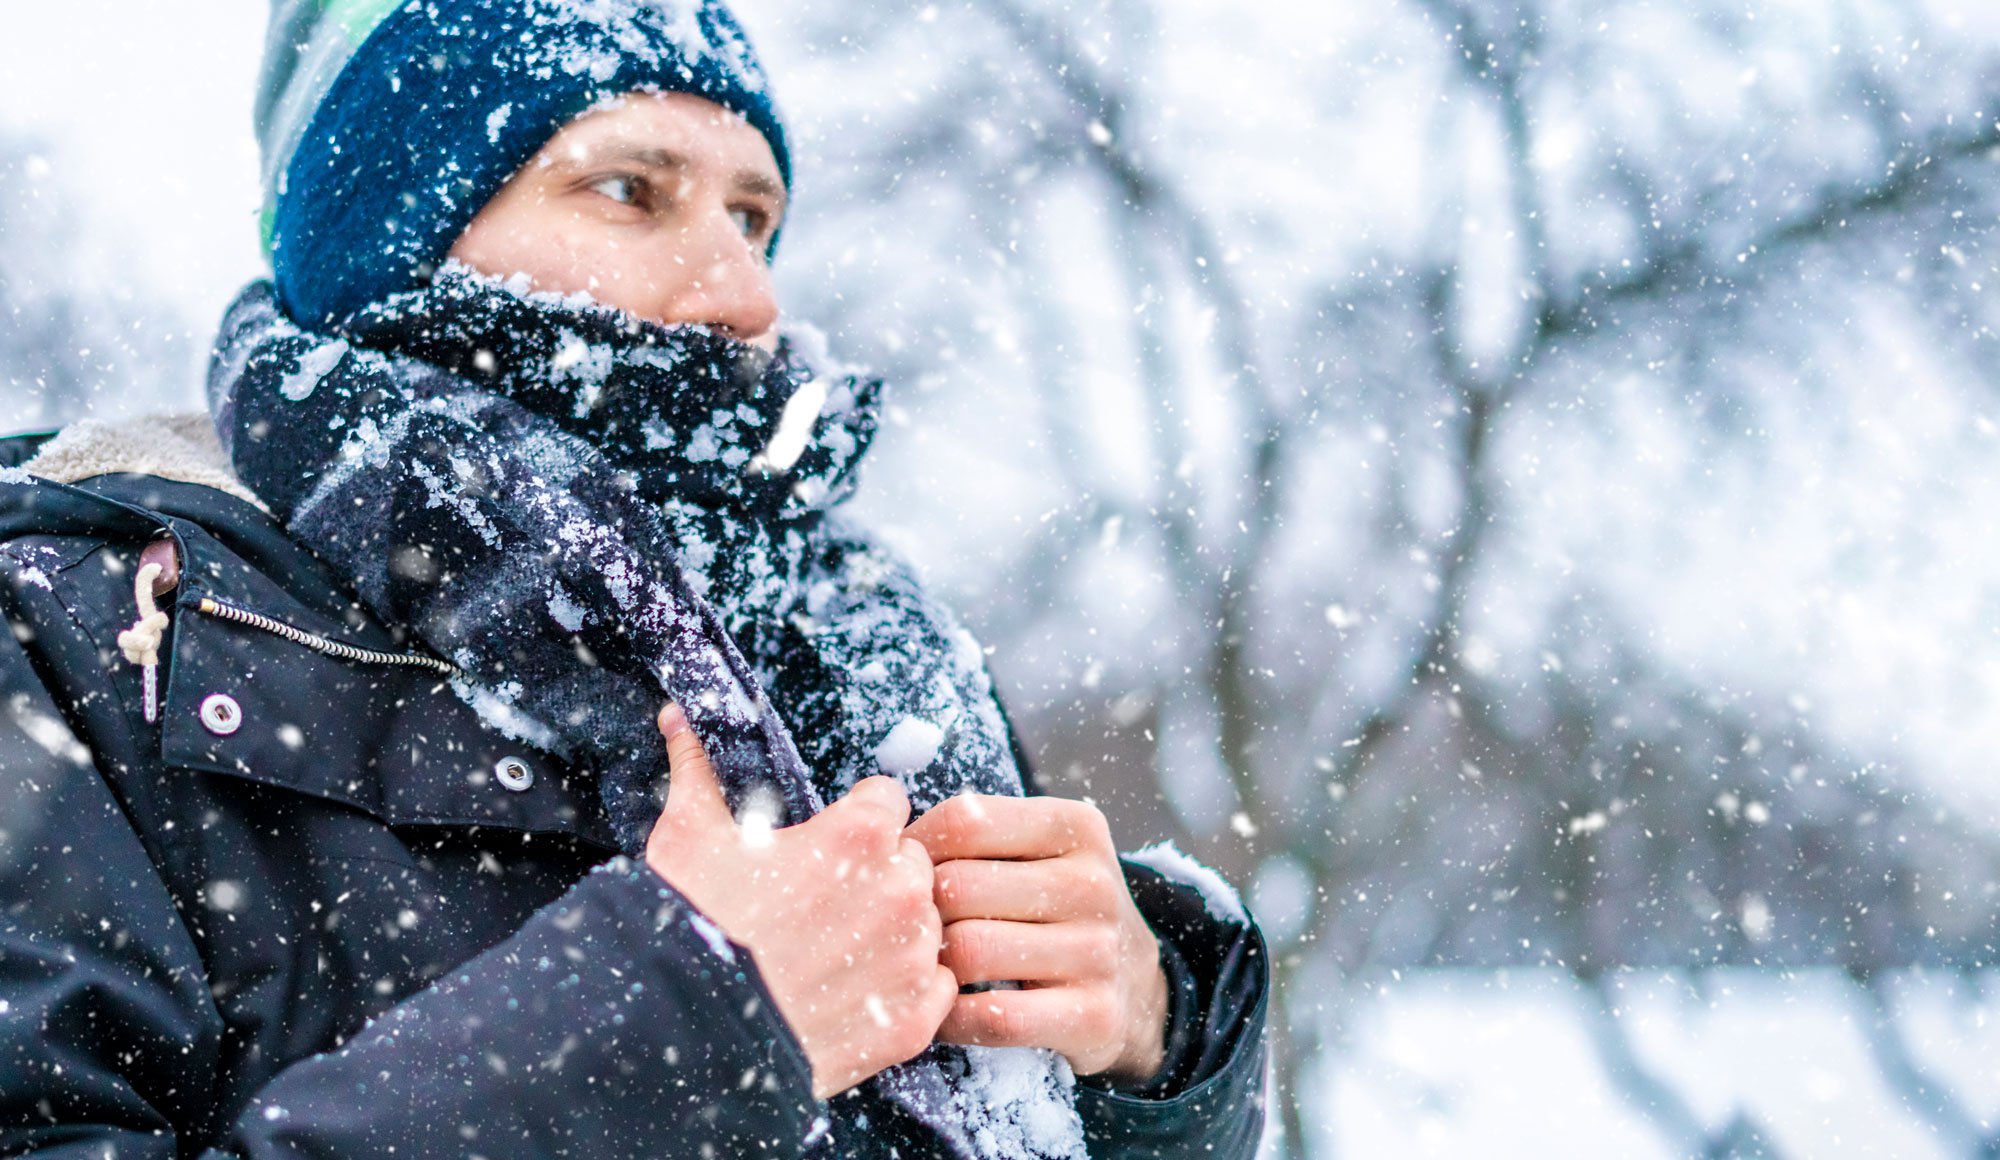 Snow Safety: How to Protect Yourself in Cold Winter Weather One